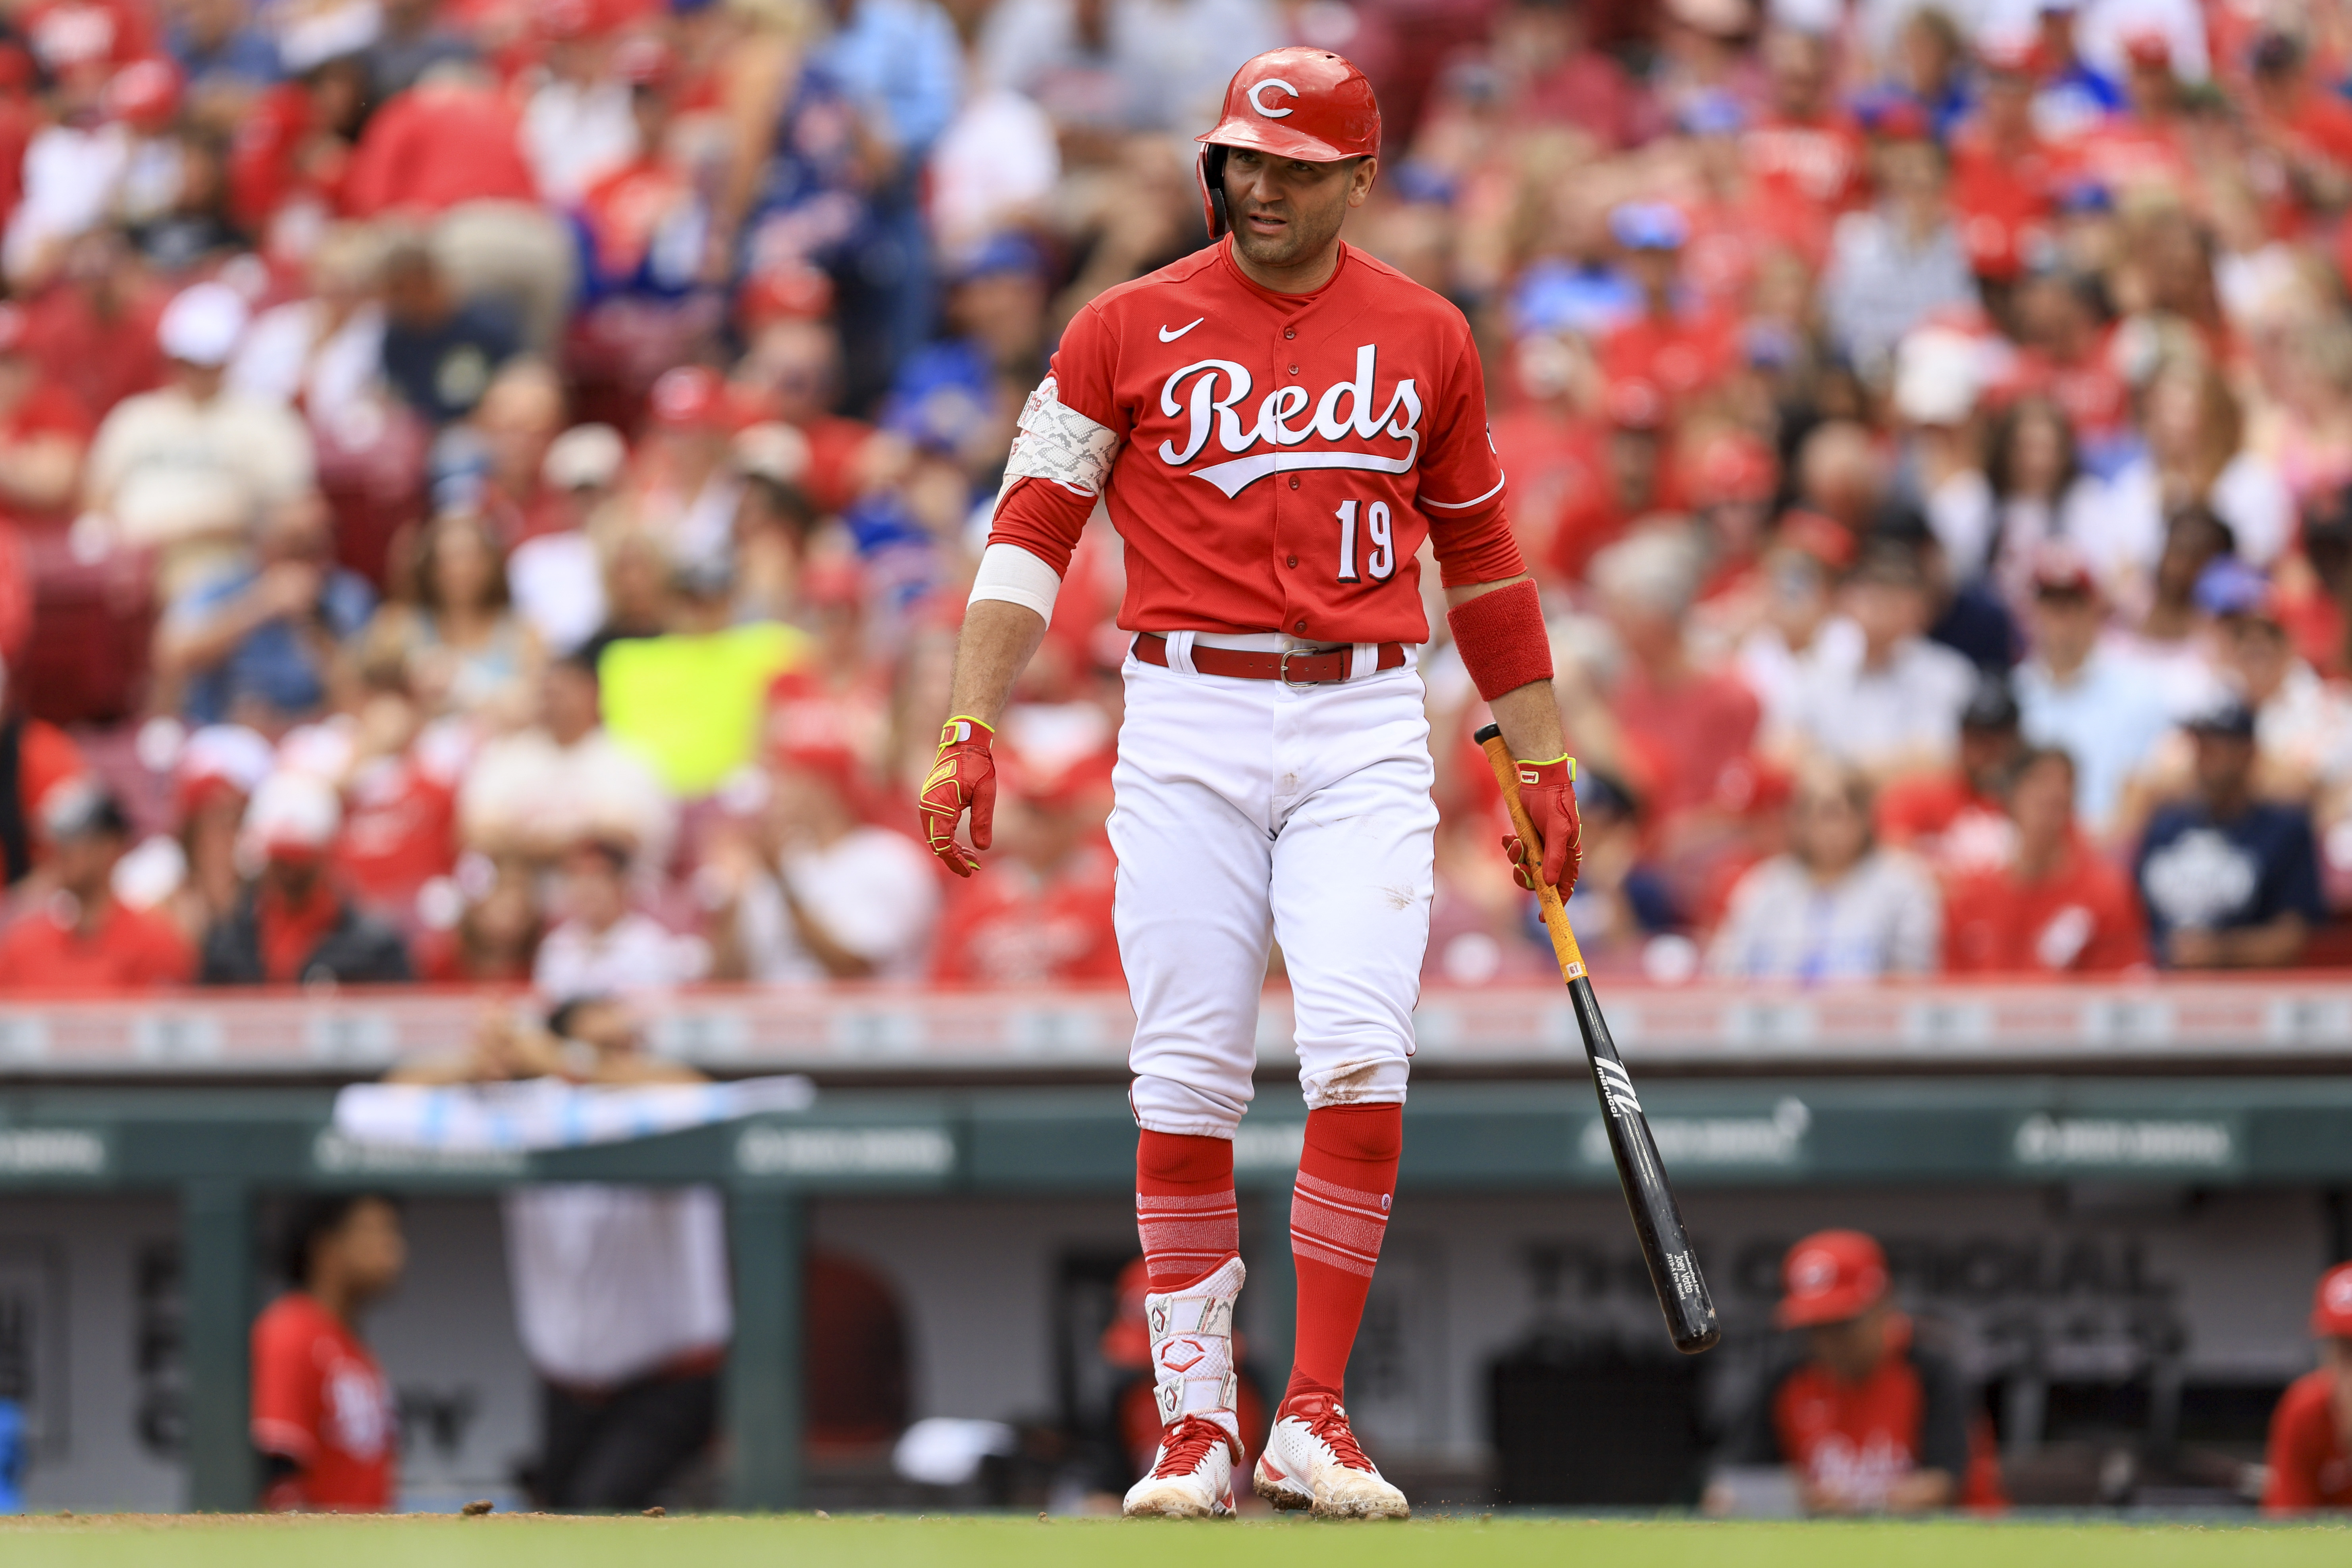 Joey Votto Is Back, Baby, and the Reds Are Loving It - Cincinnati Magazine